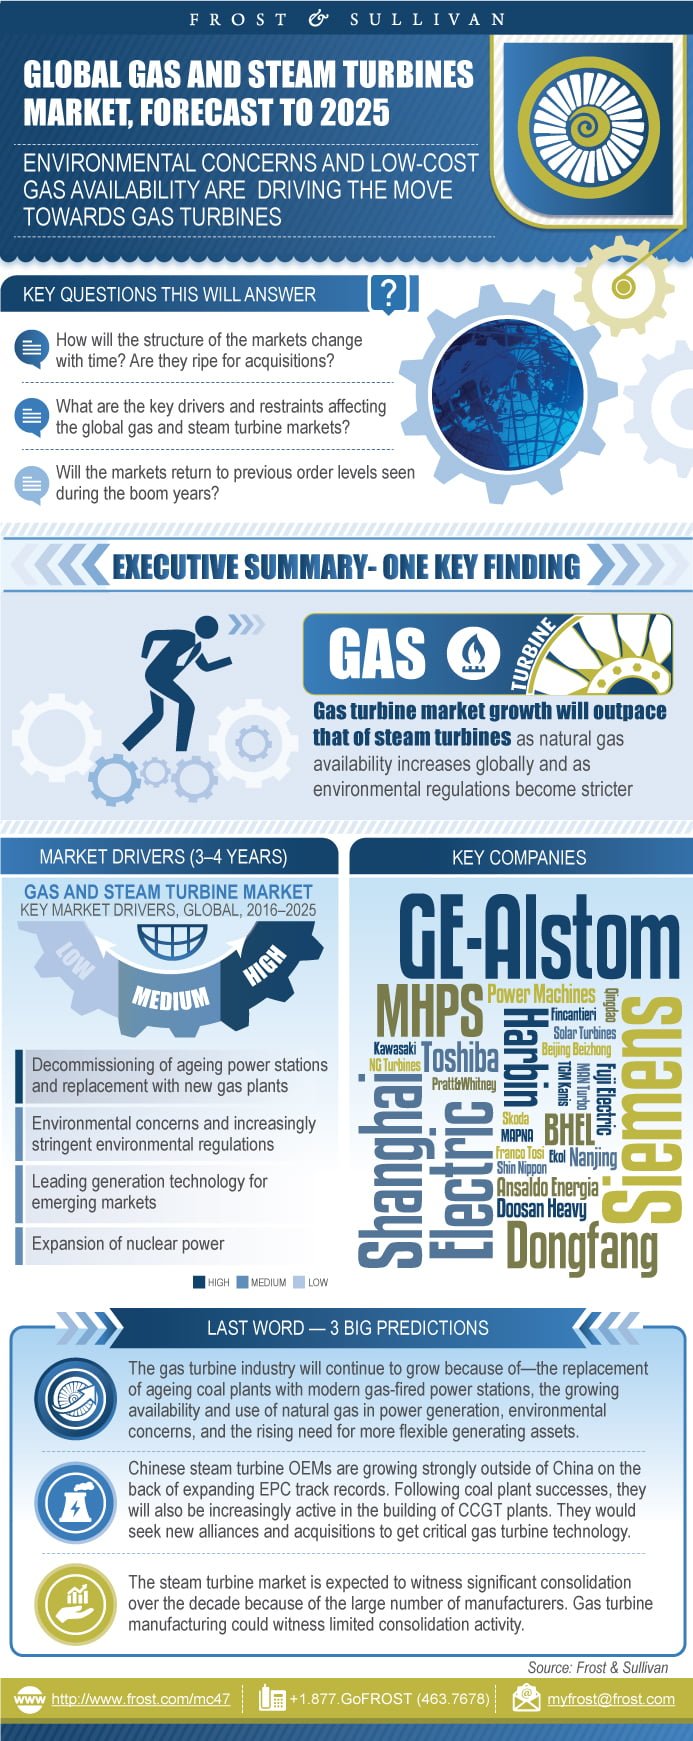 Global Gas and Steam Turbines Market, Forecast to 2025